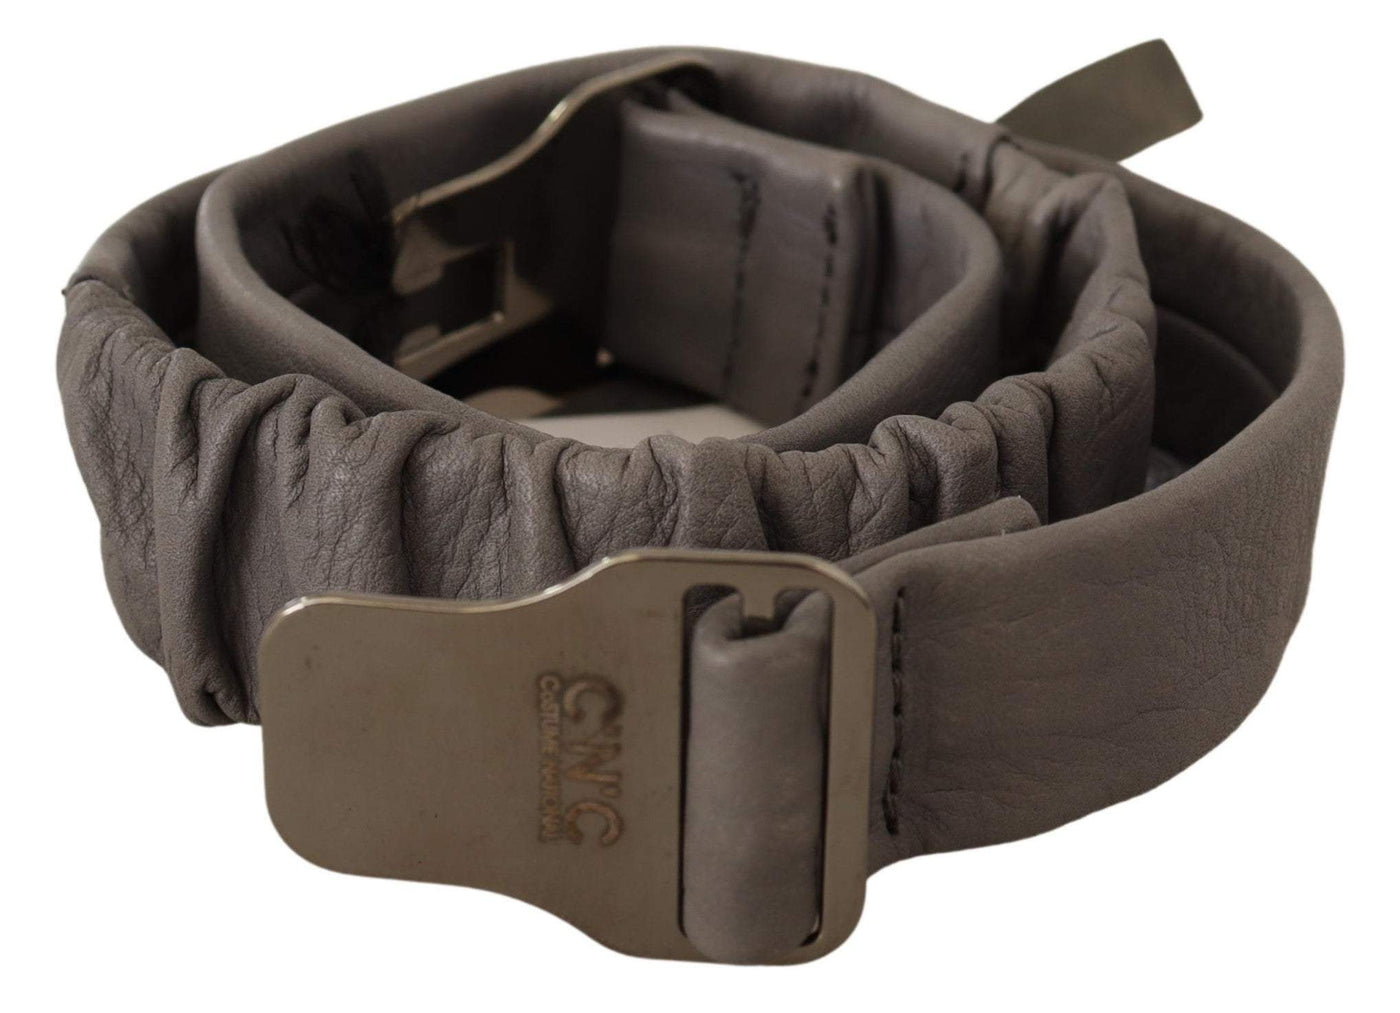 Costume National Gray Leather Silver Buckle Waist Belt 85 cm / 34 Inches, Belts - Women - Accessories, Costume National, feed-1, Gray at SEYMAYKA